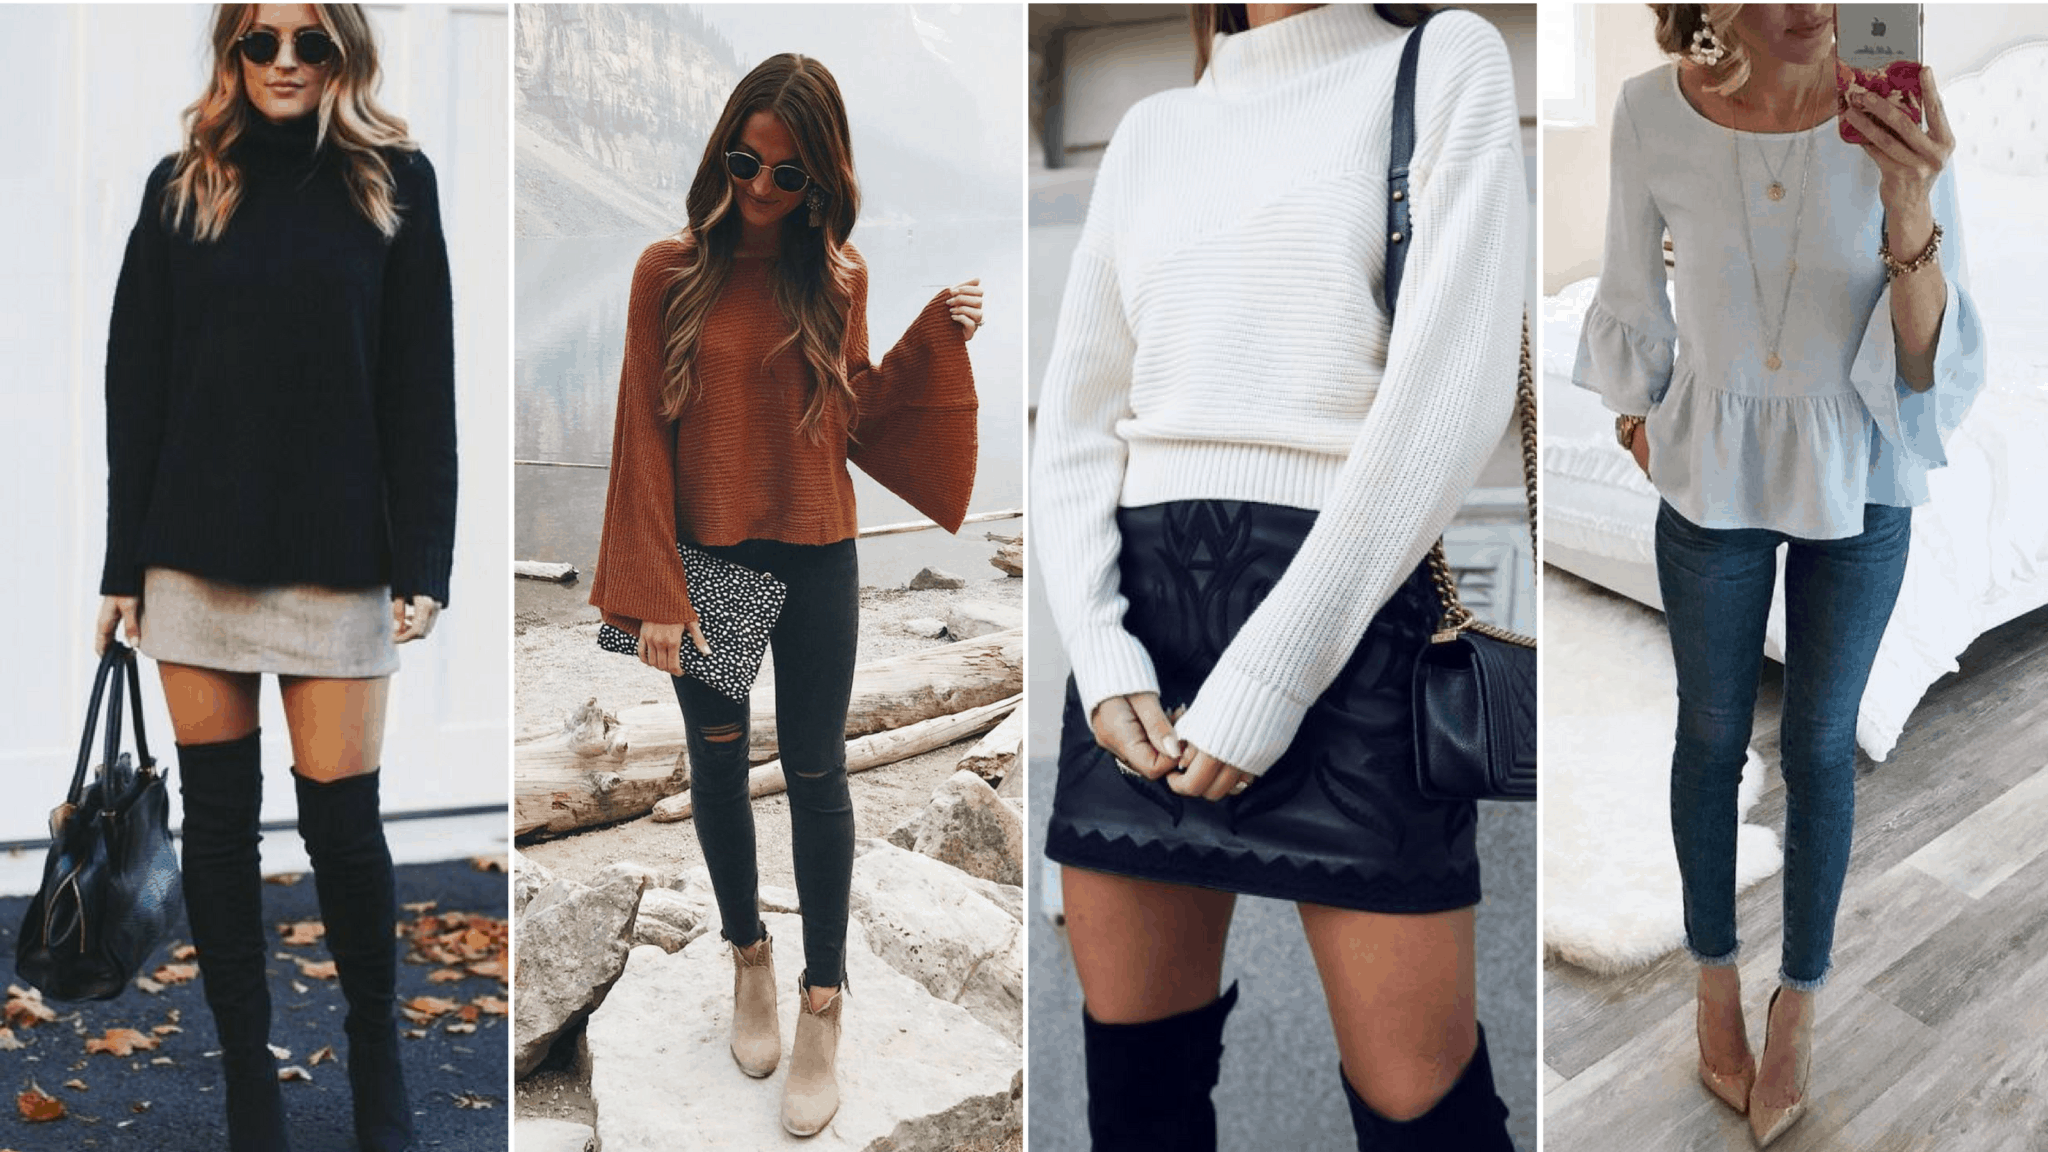 10 outfit ideas for Thanksgiving - GirlsLife